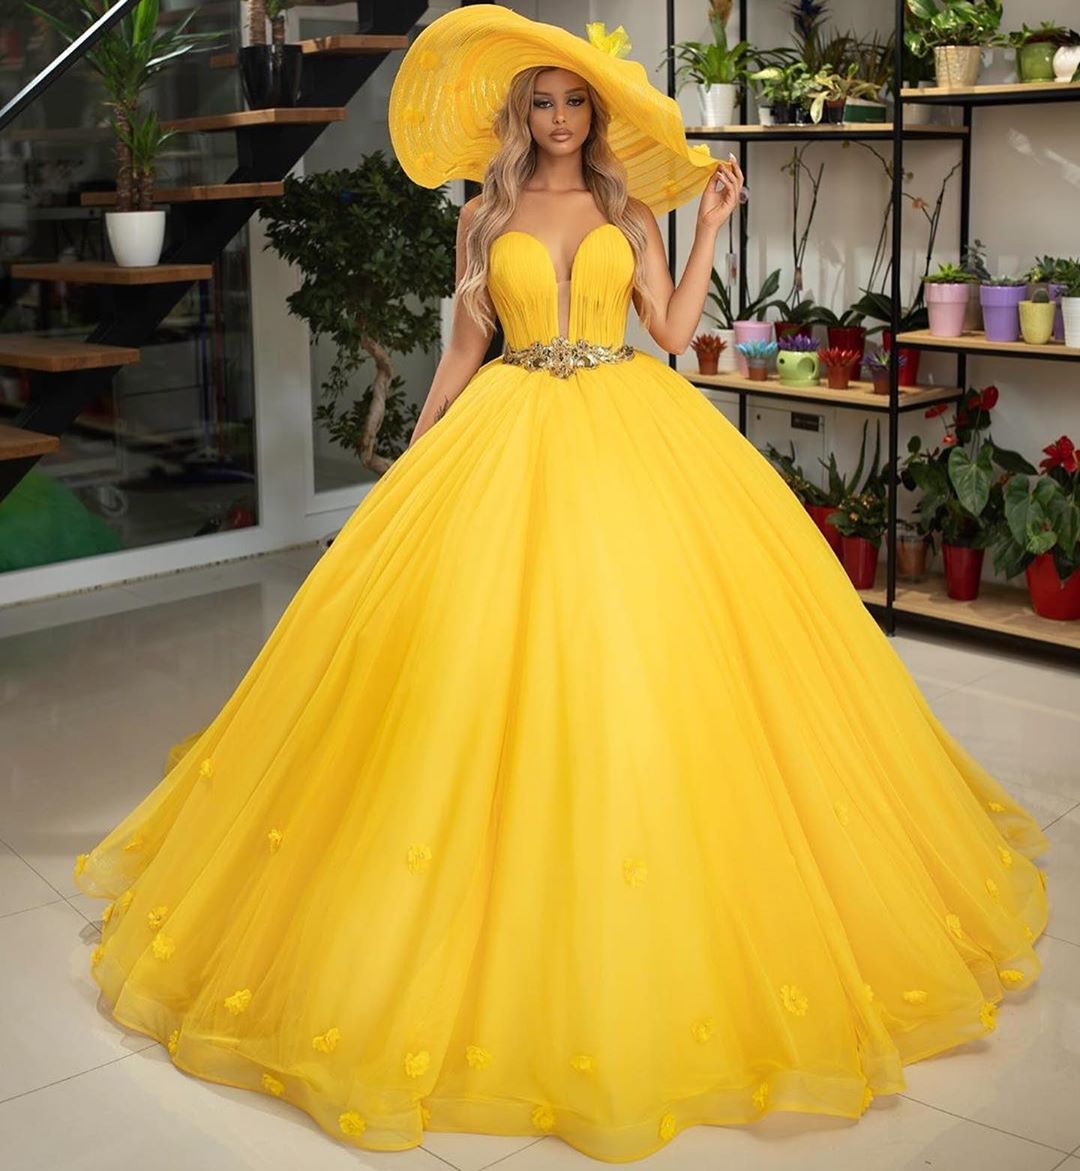 bright yellow quinceanera dress,yellow quinceanera dress,deep v neckline quinceanera dress,tulle skirt quinceanera dress,handmade flower quinceanera dress,most beautiful quinceanera dress flowers theme,quinceanera dress with belt,customize your own quinceanera dress,